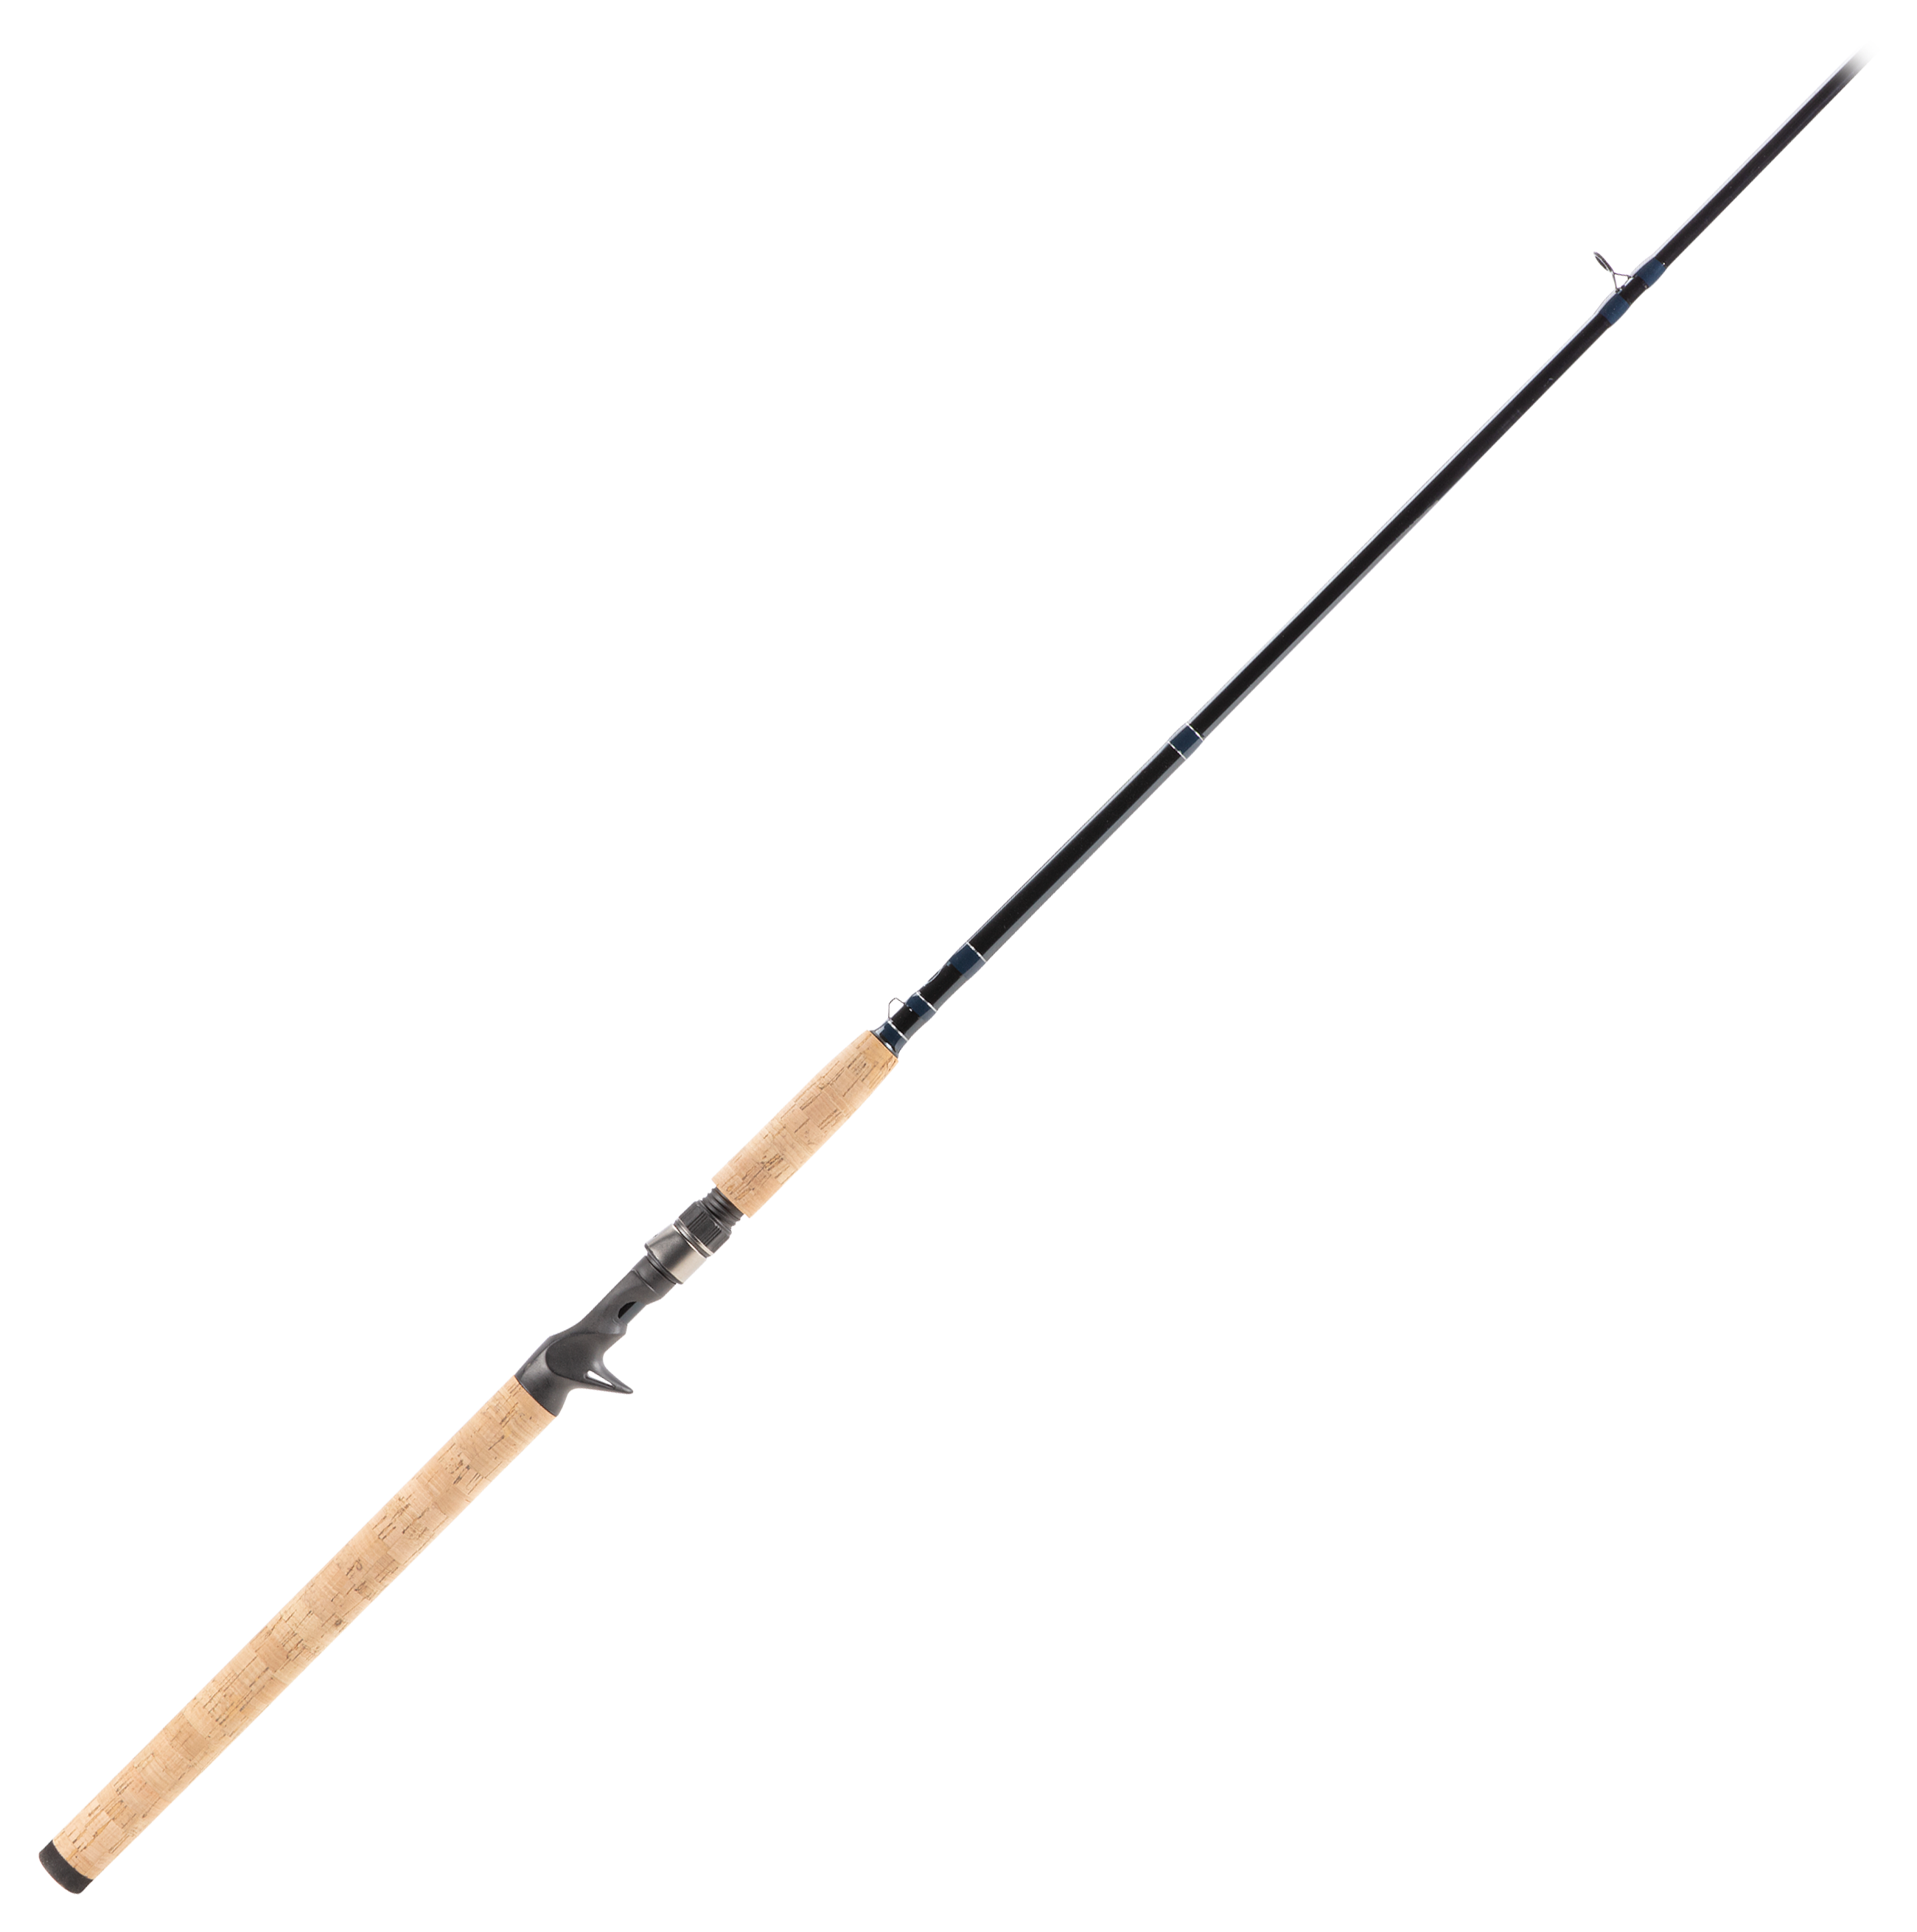 Bass Pro Shops Graphite Series Muskie Casting Rod - 7'6″ - Heavy